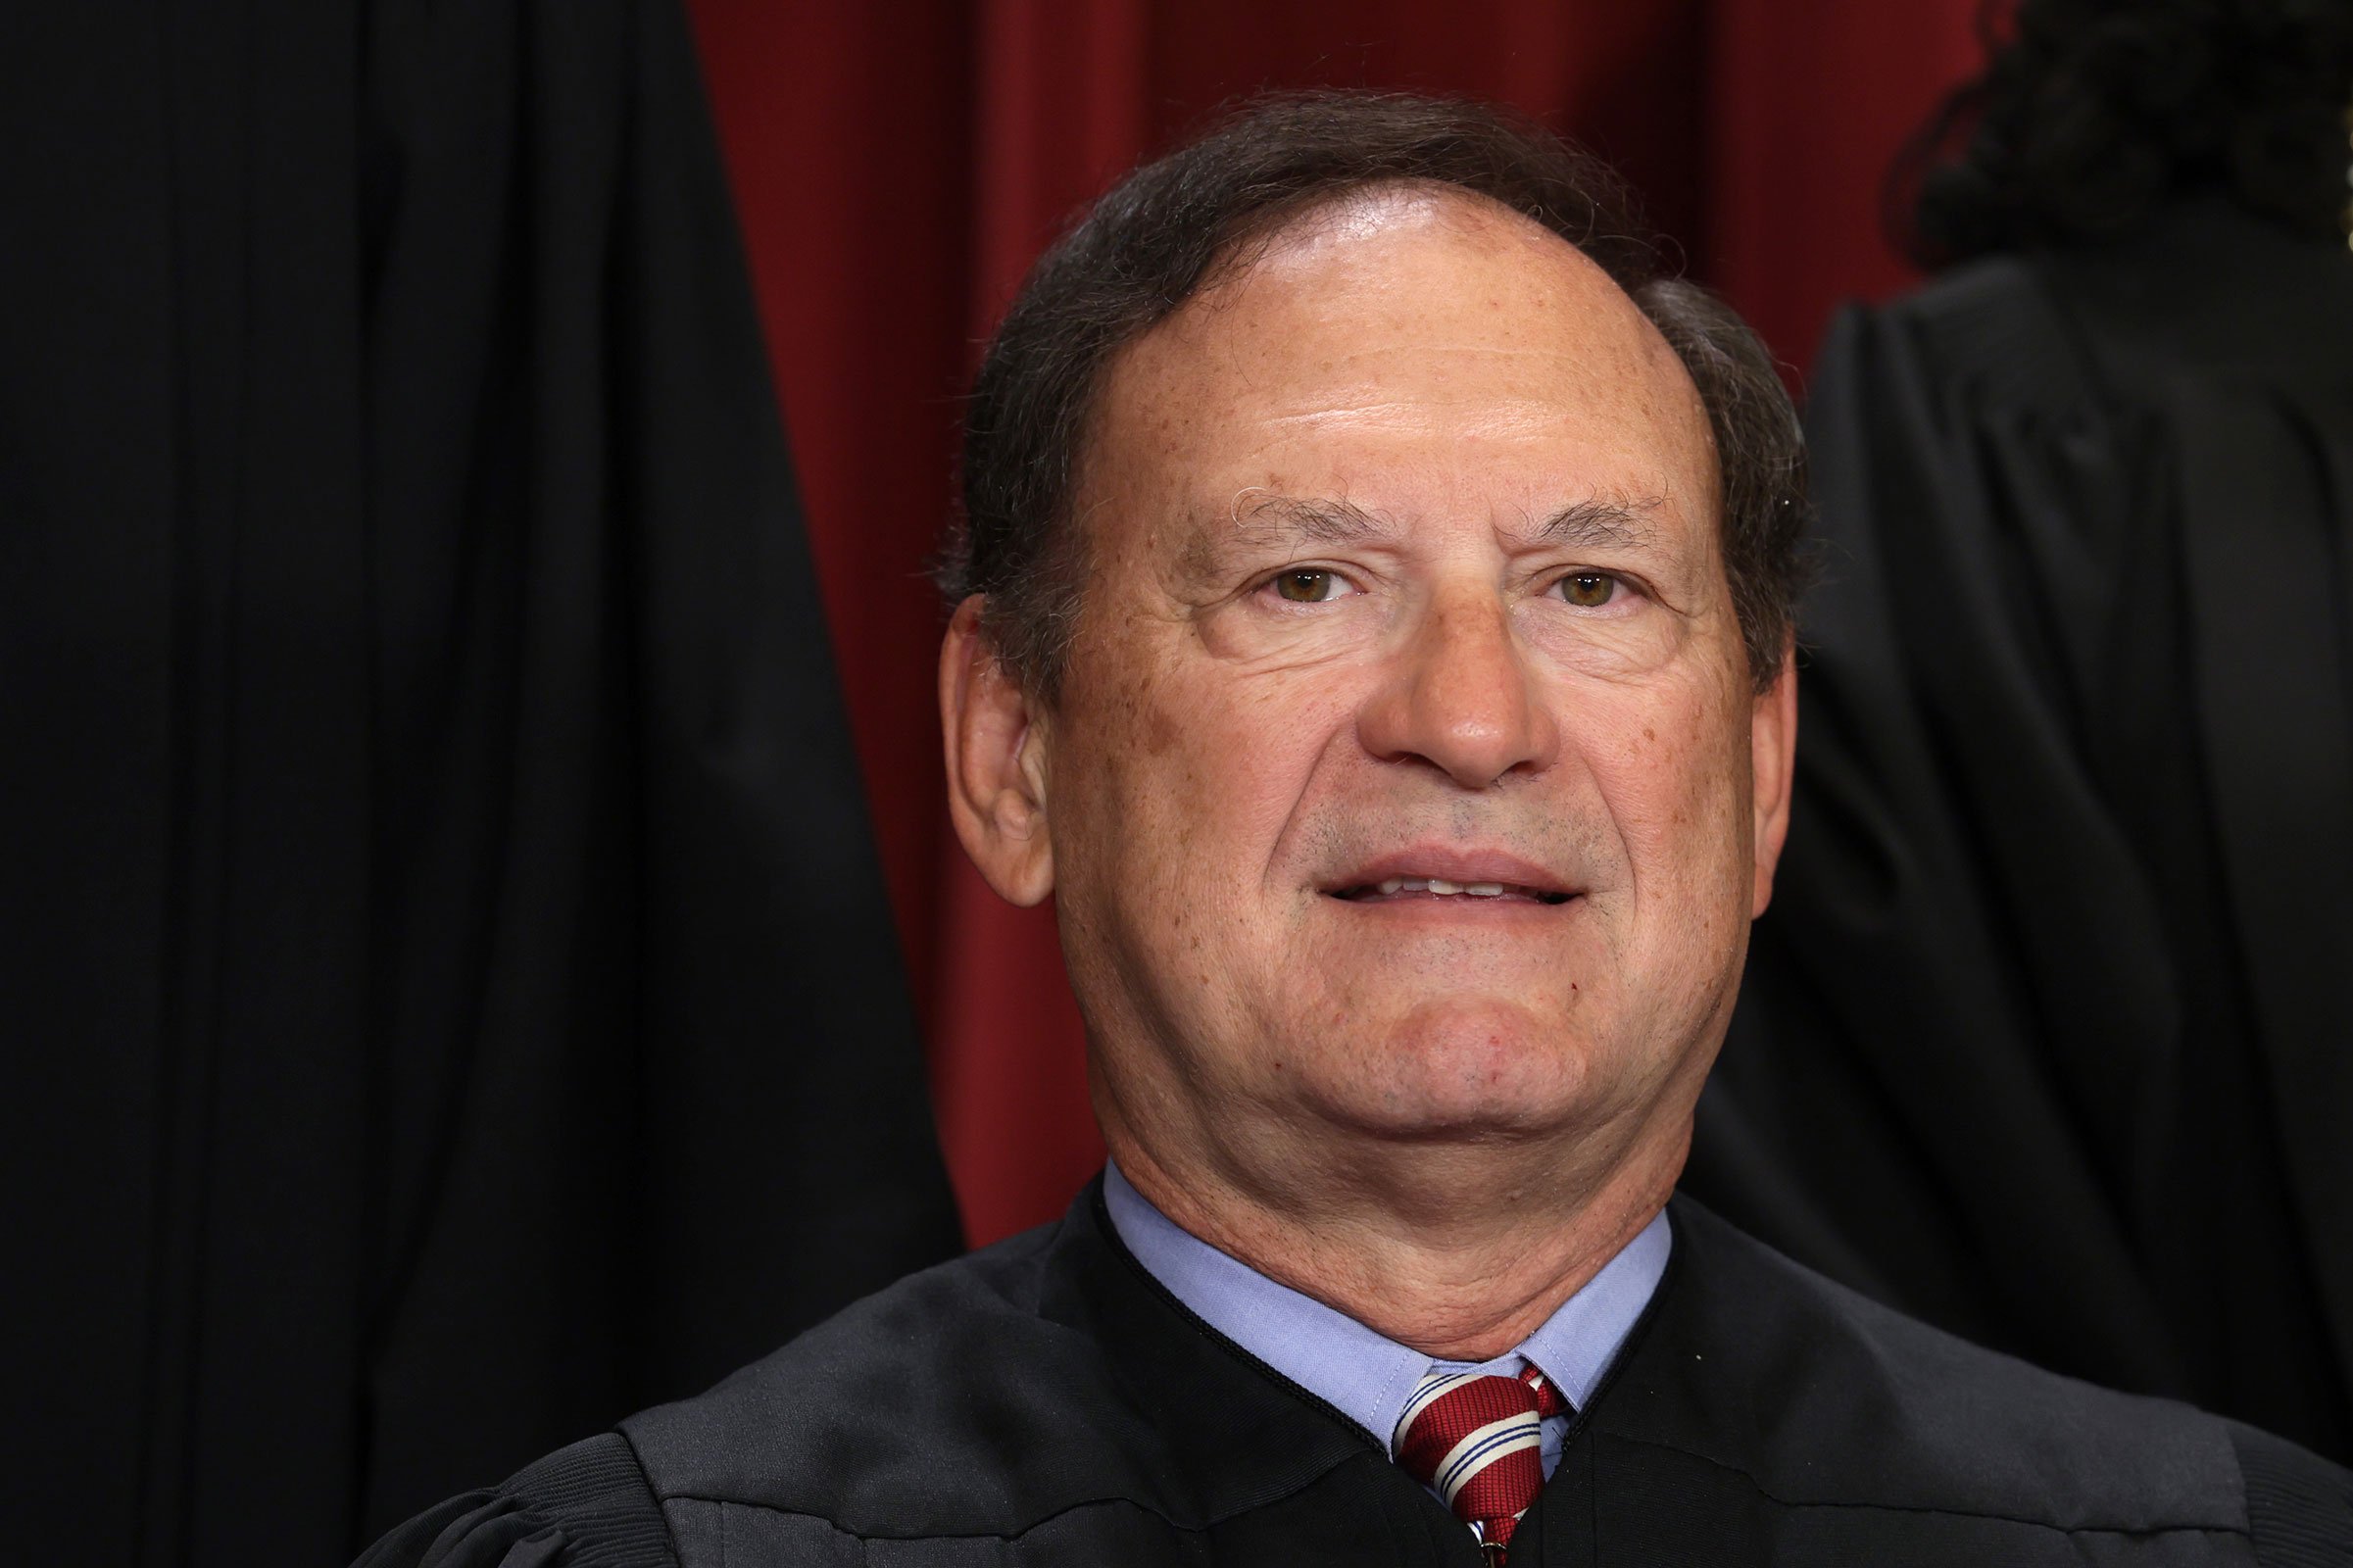 Conservative justices question if mental health issues justify abortions